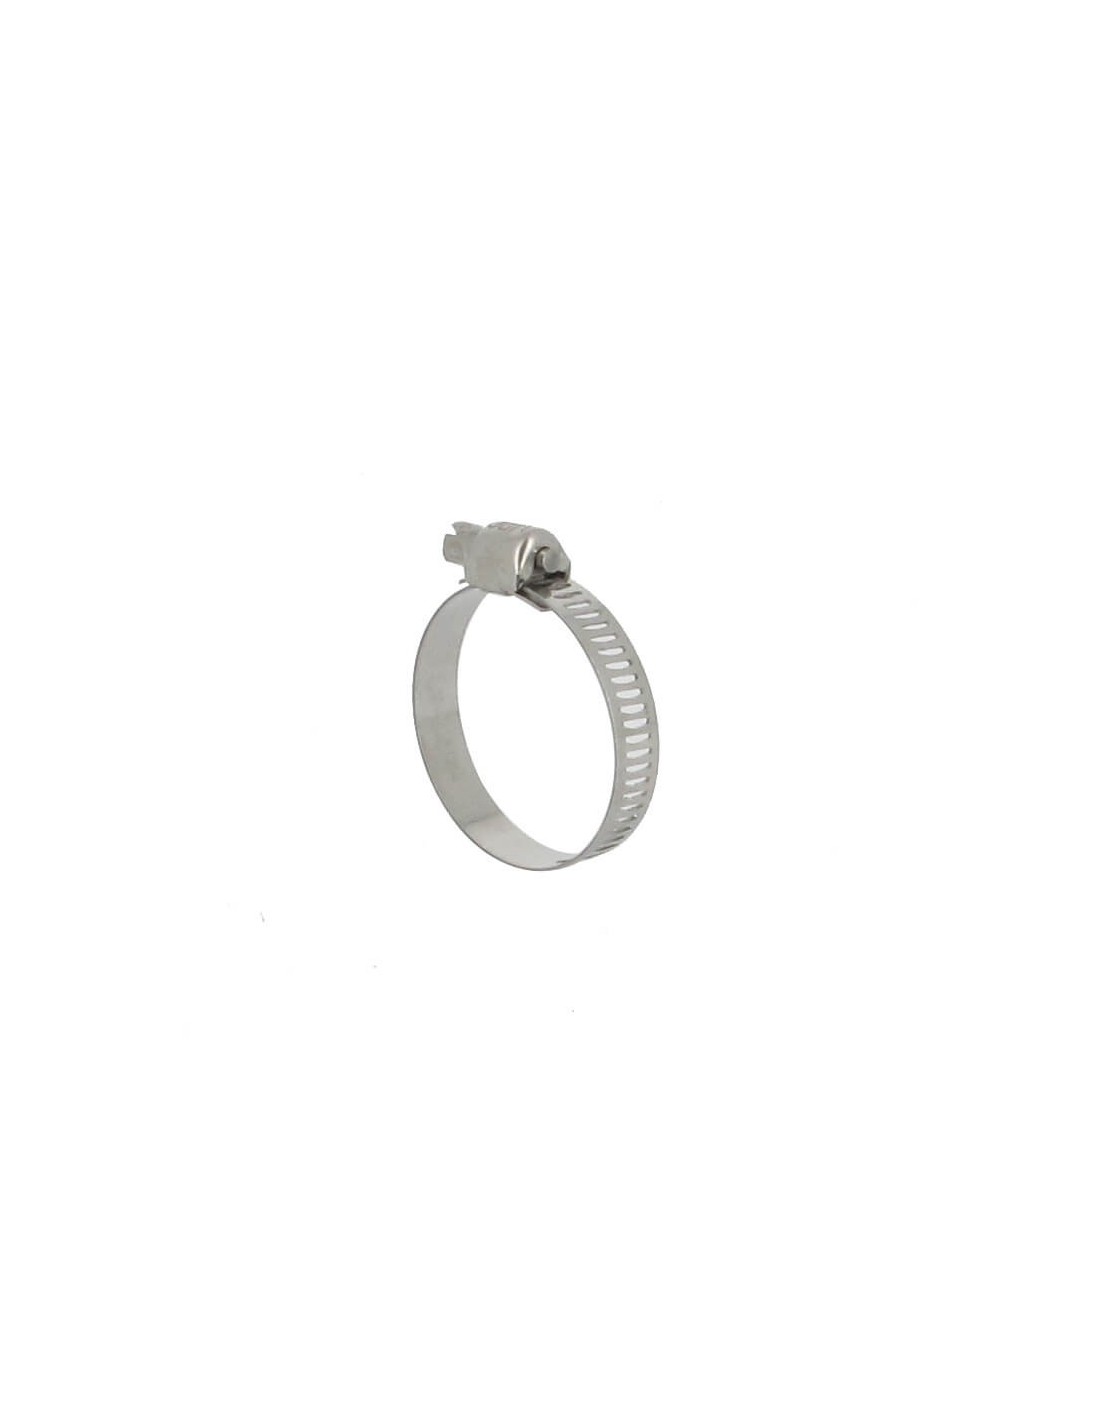 100 colliers Inoxs. Collier simple M6. Inox A2, D. 14 - 15 mm - ABM6A2015 -  Index